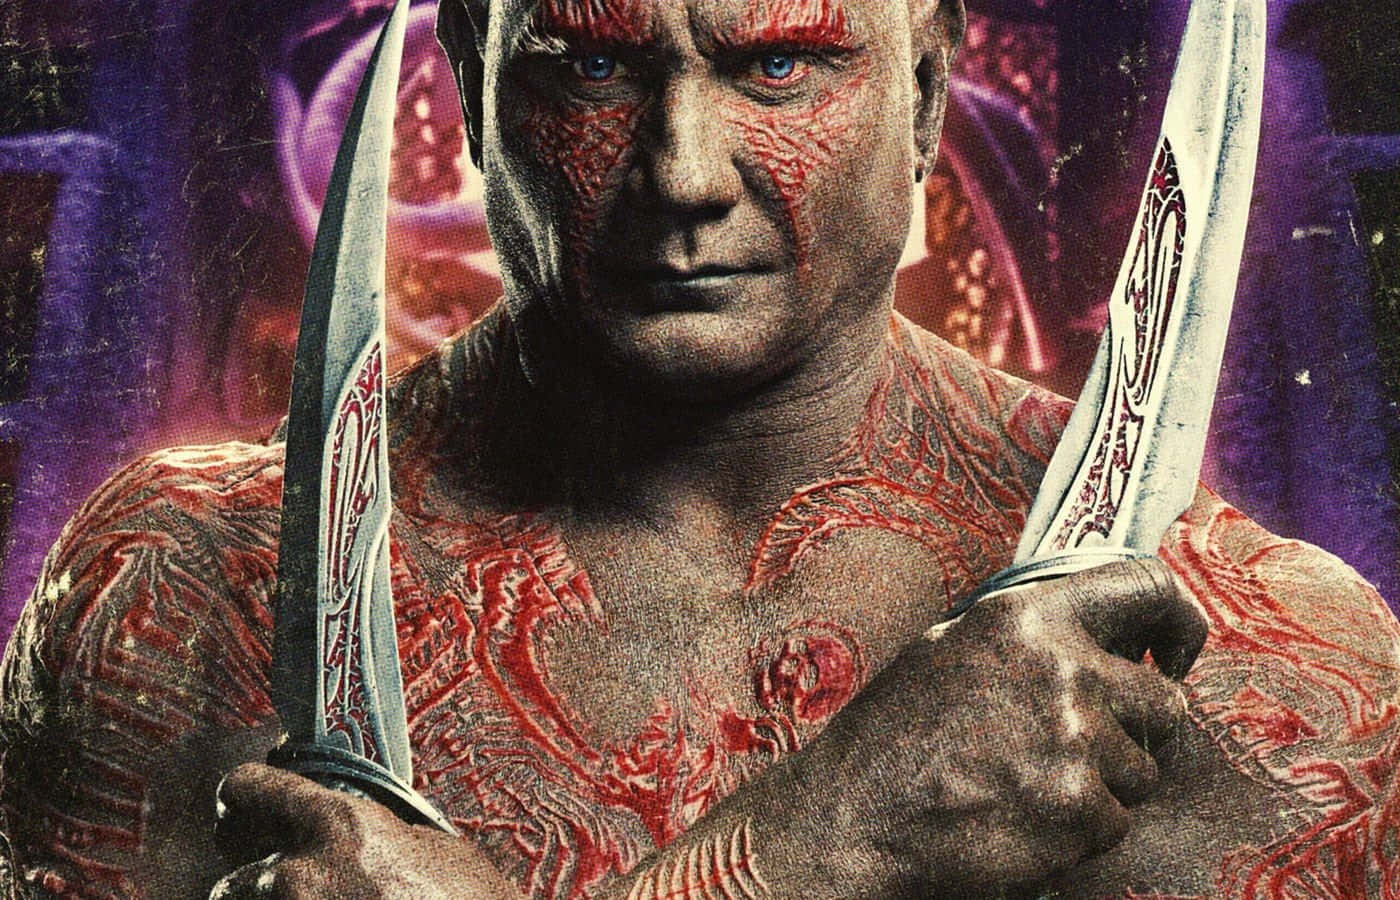 Explore the Last Frontier with Drax Wallpaper